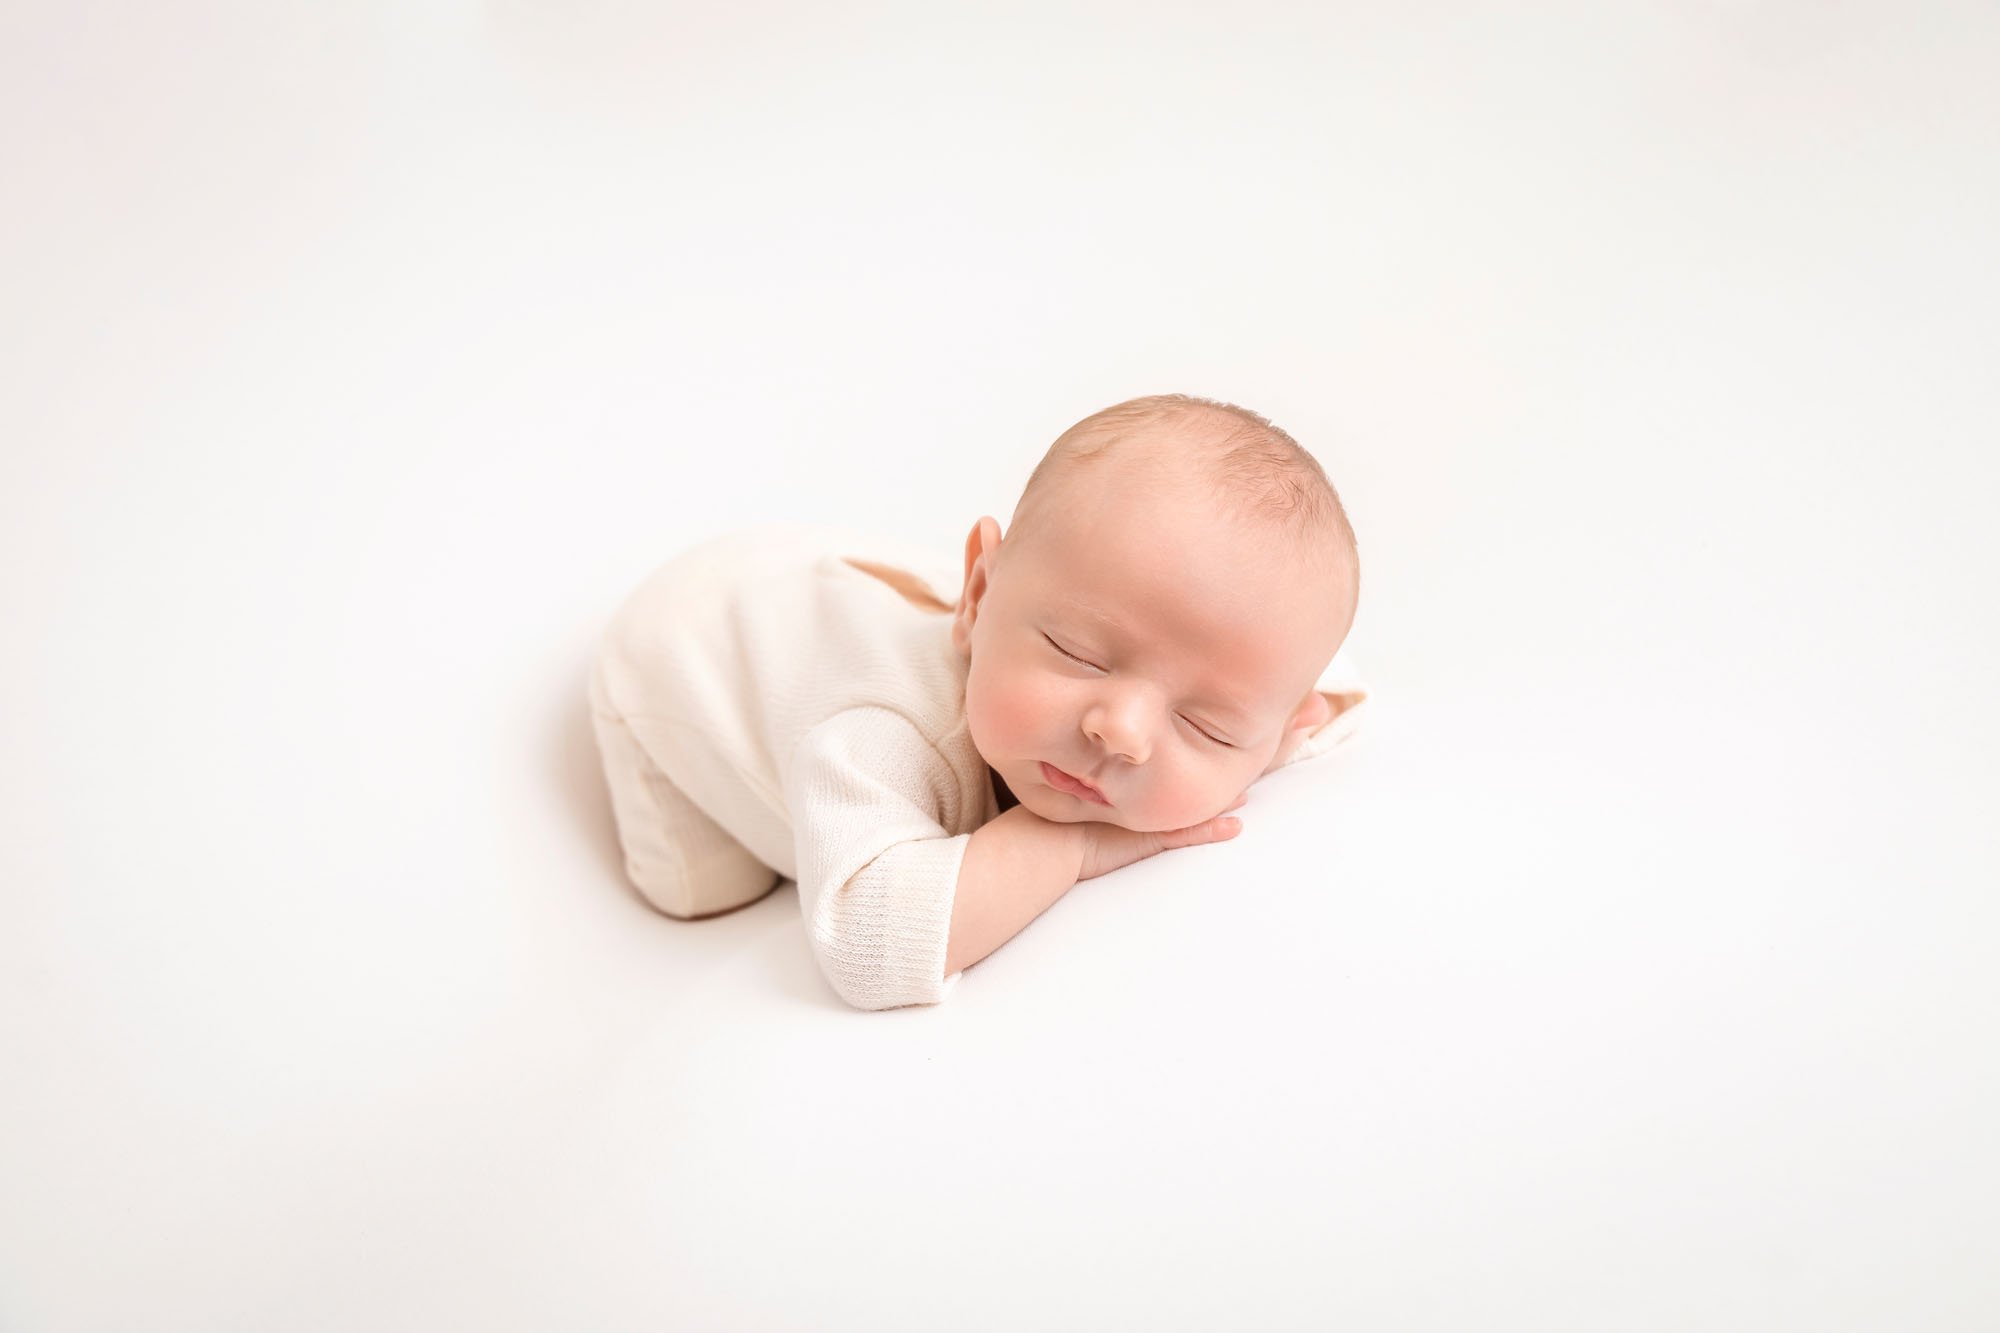 Newborn-photography-in-leeds-baby-on-white-front-facing.jpg